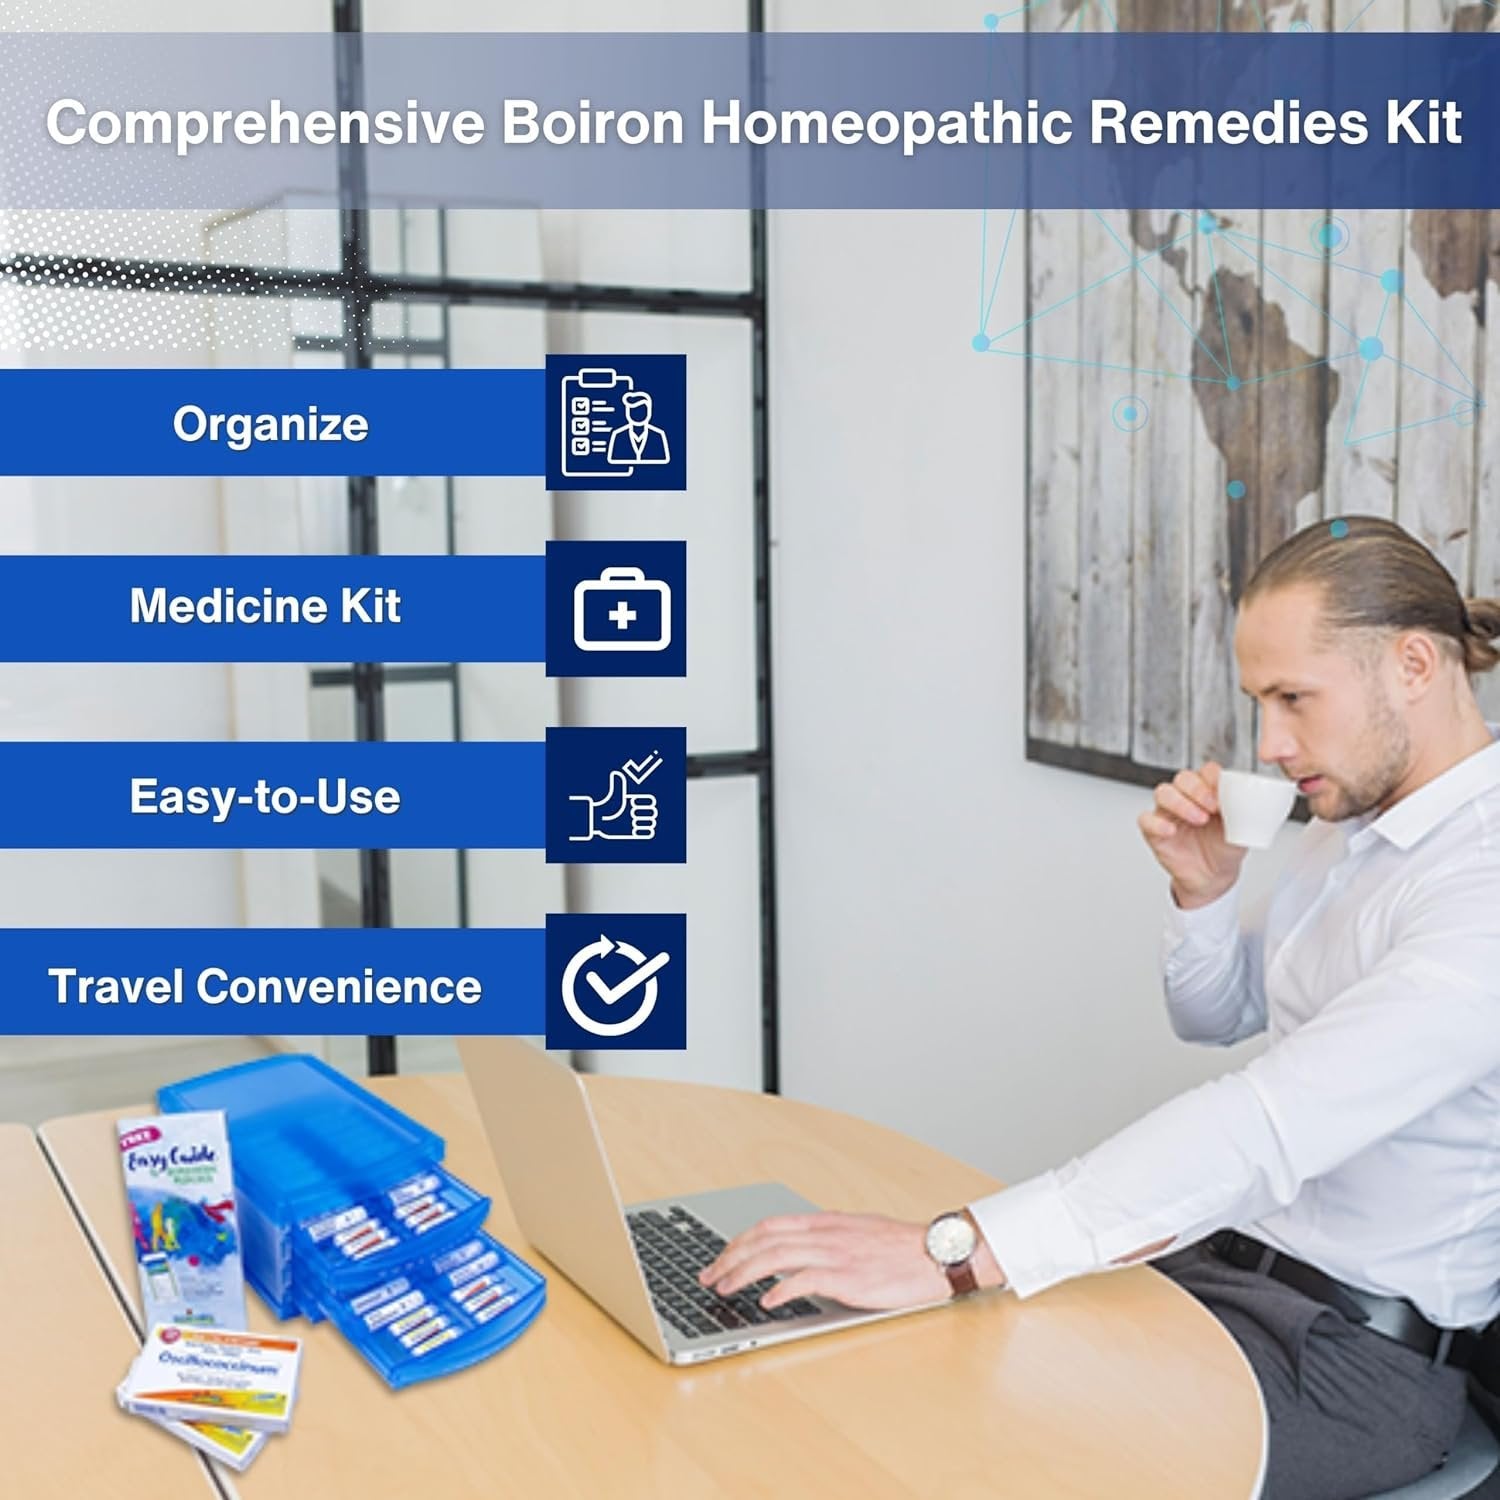 Boiron HomeoFamily Comprehensive Homeopathic Family Kit with The Essentials and a Multi-Purpose Keychain